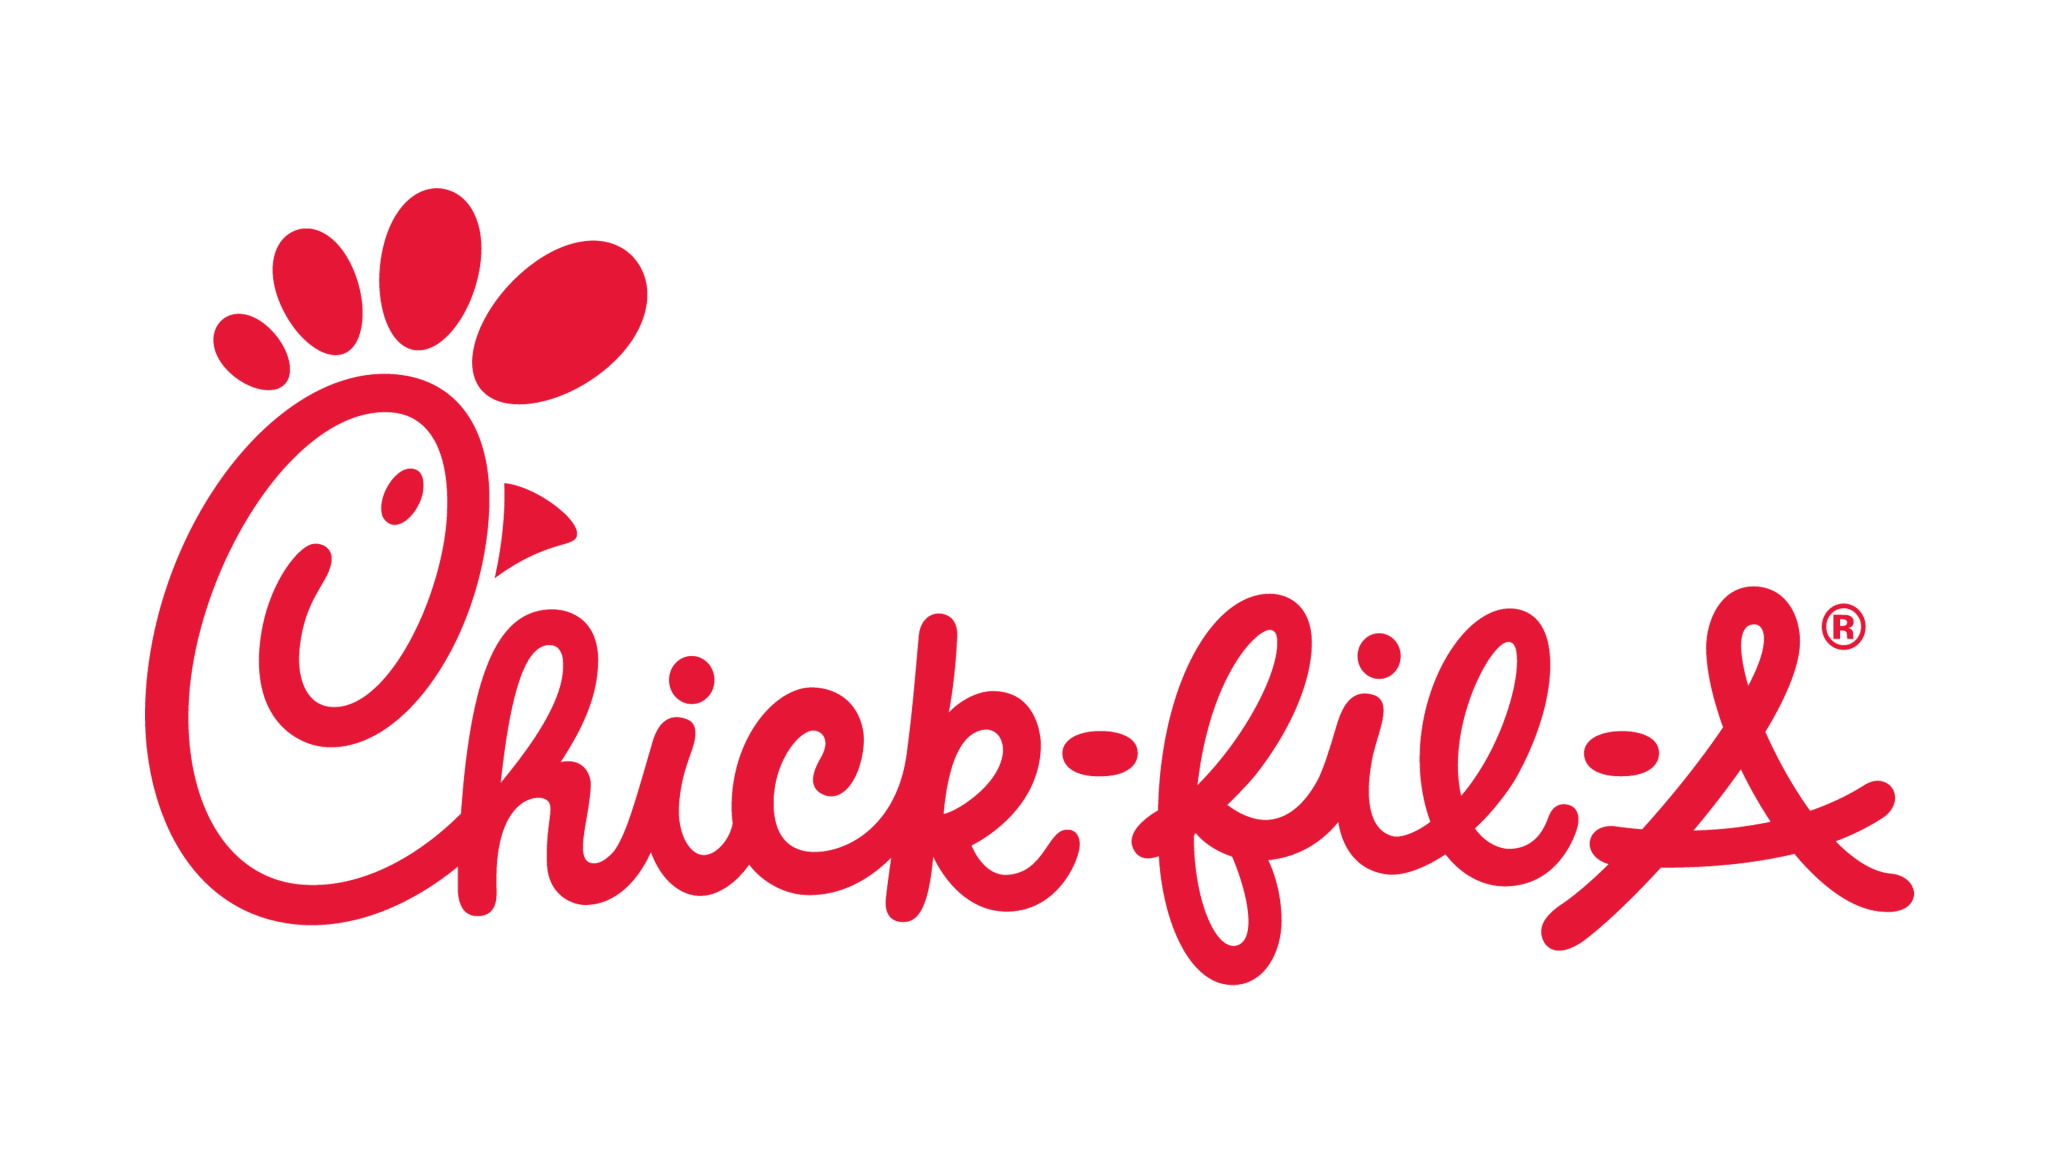 ChickfilA Logo and symbol, meaning, history, PNG, brand